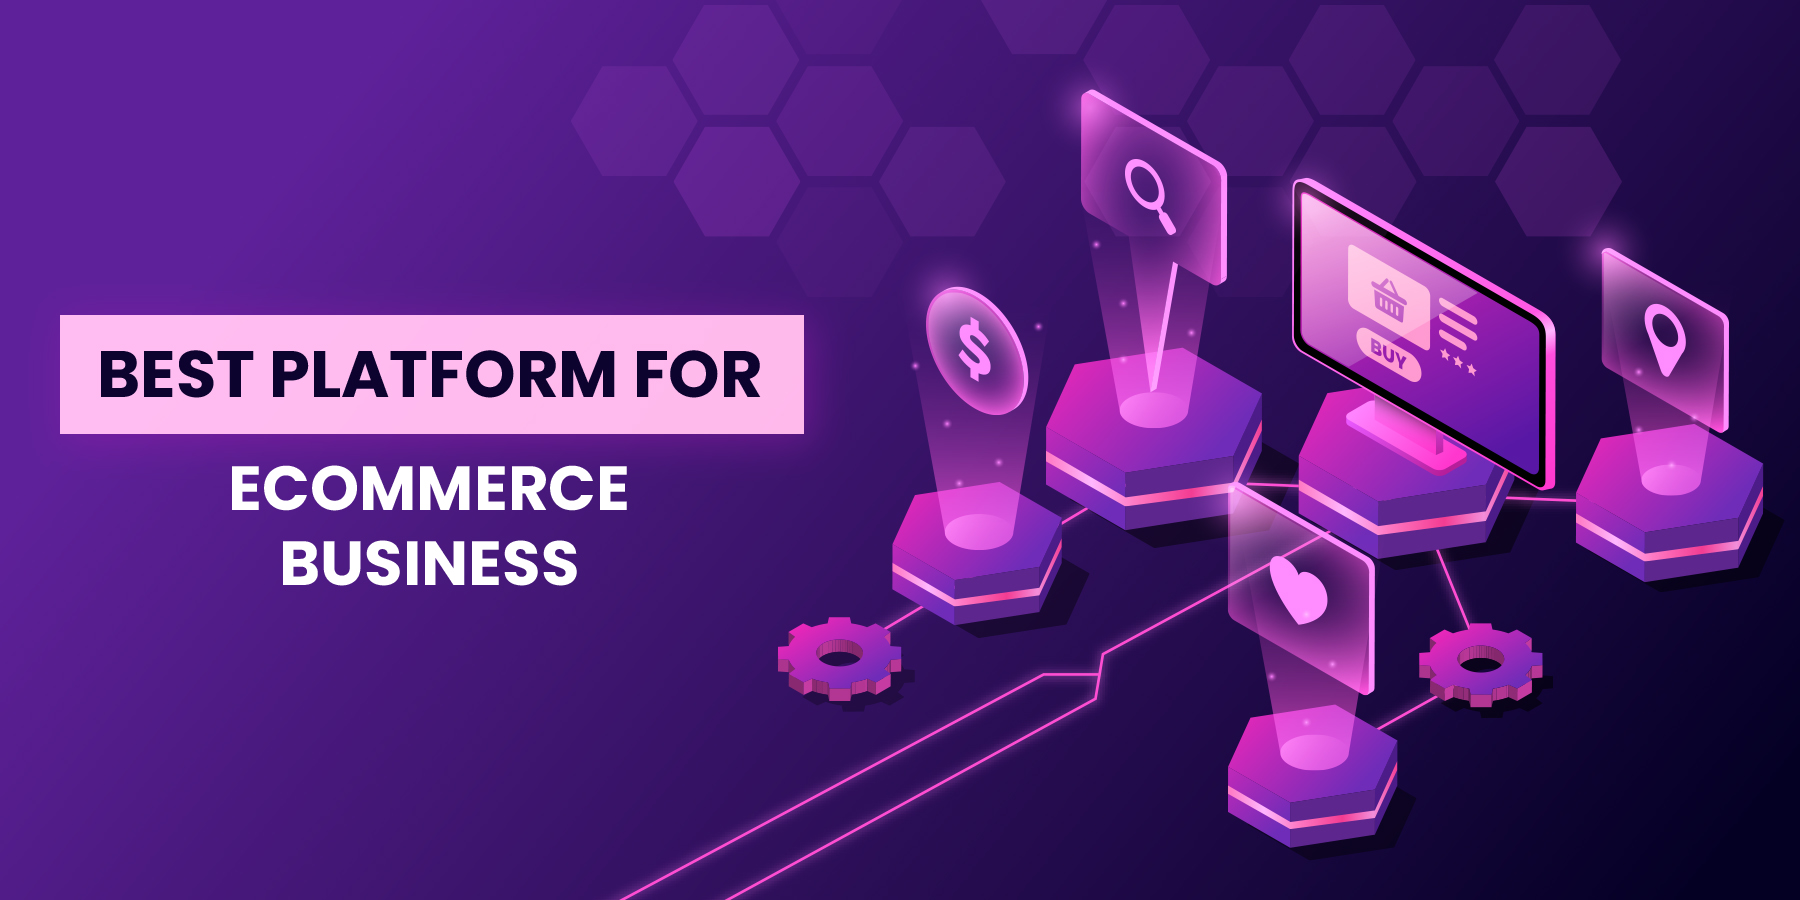 How to Choose the Best Platform for Your eCommerce Business